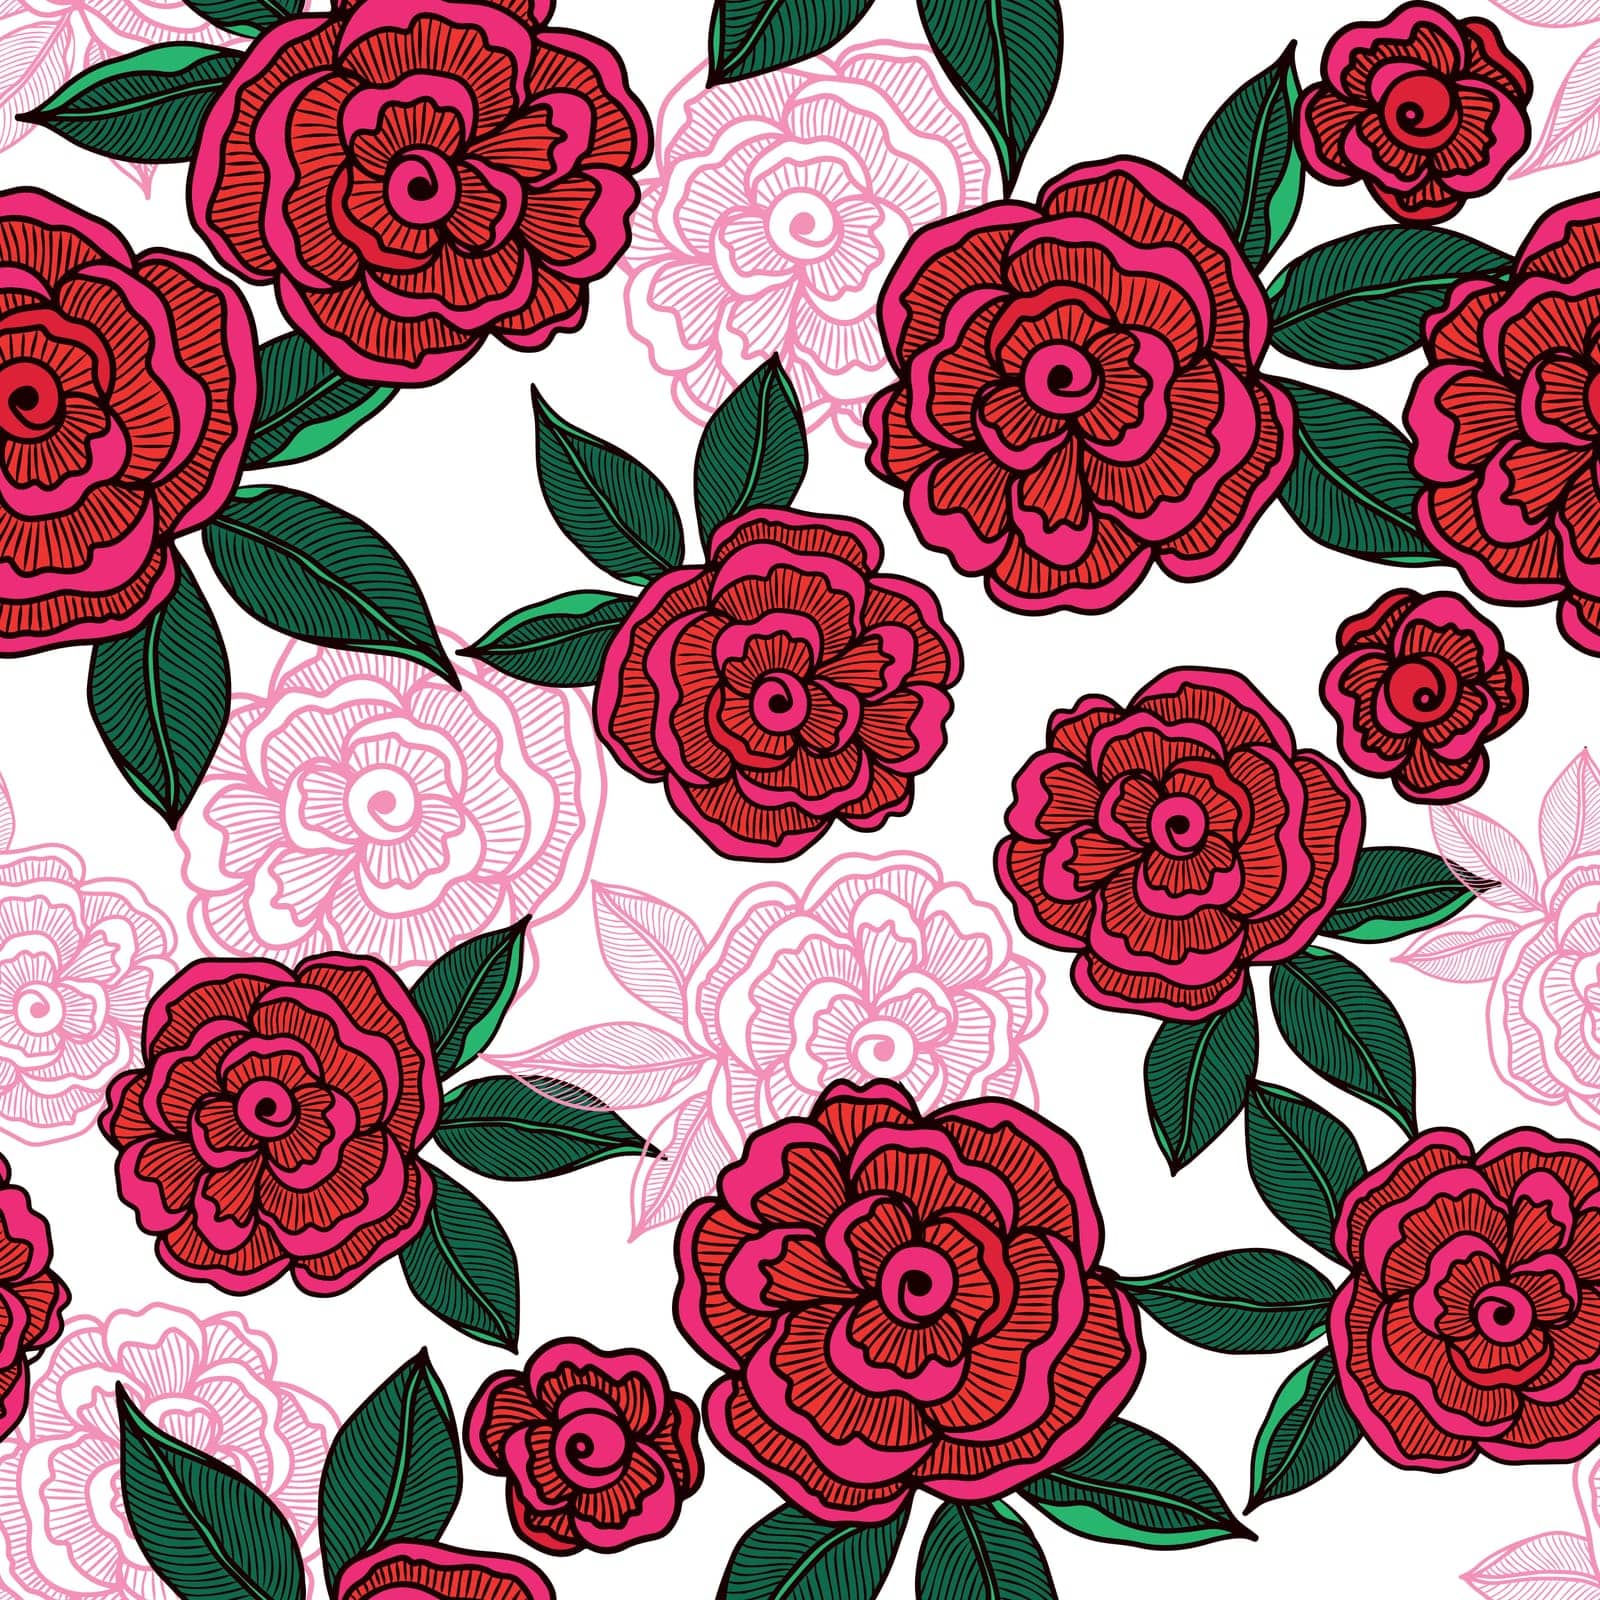 Cute rose flower seamless pattern for textile background